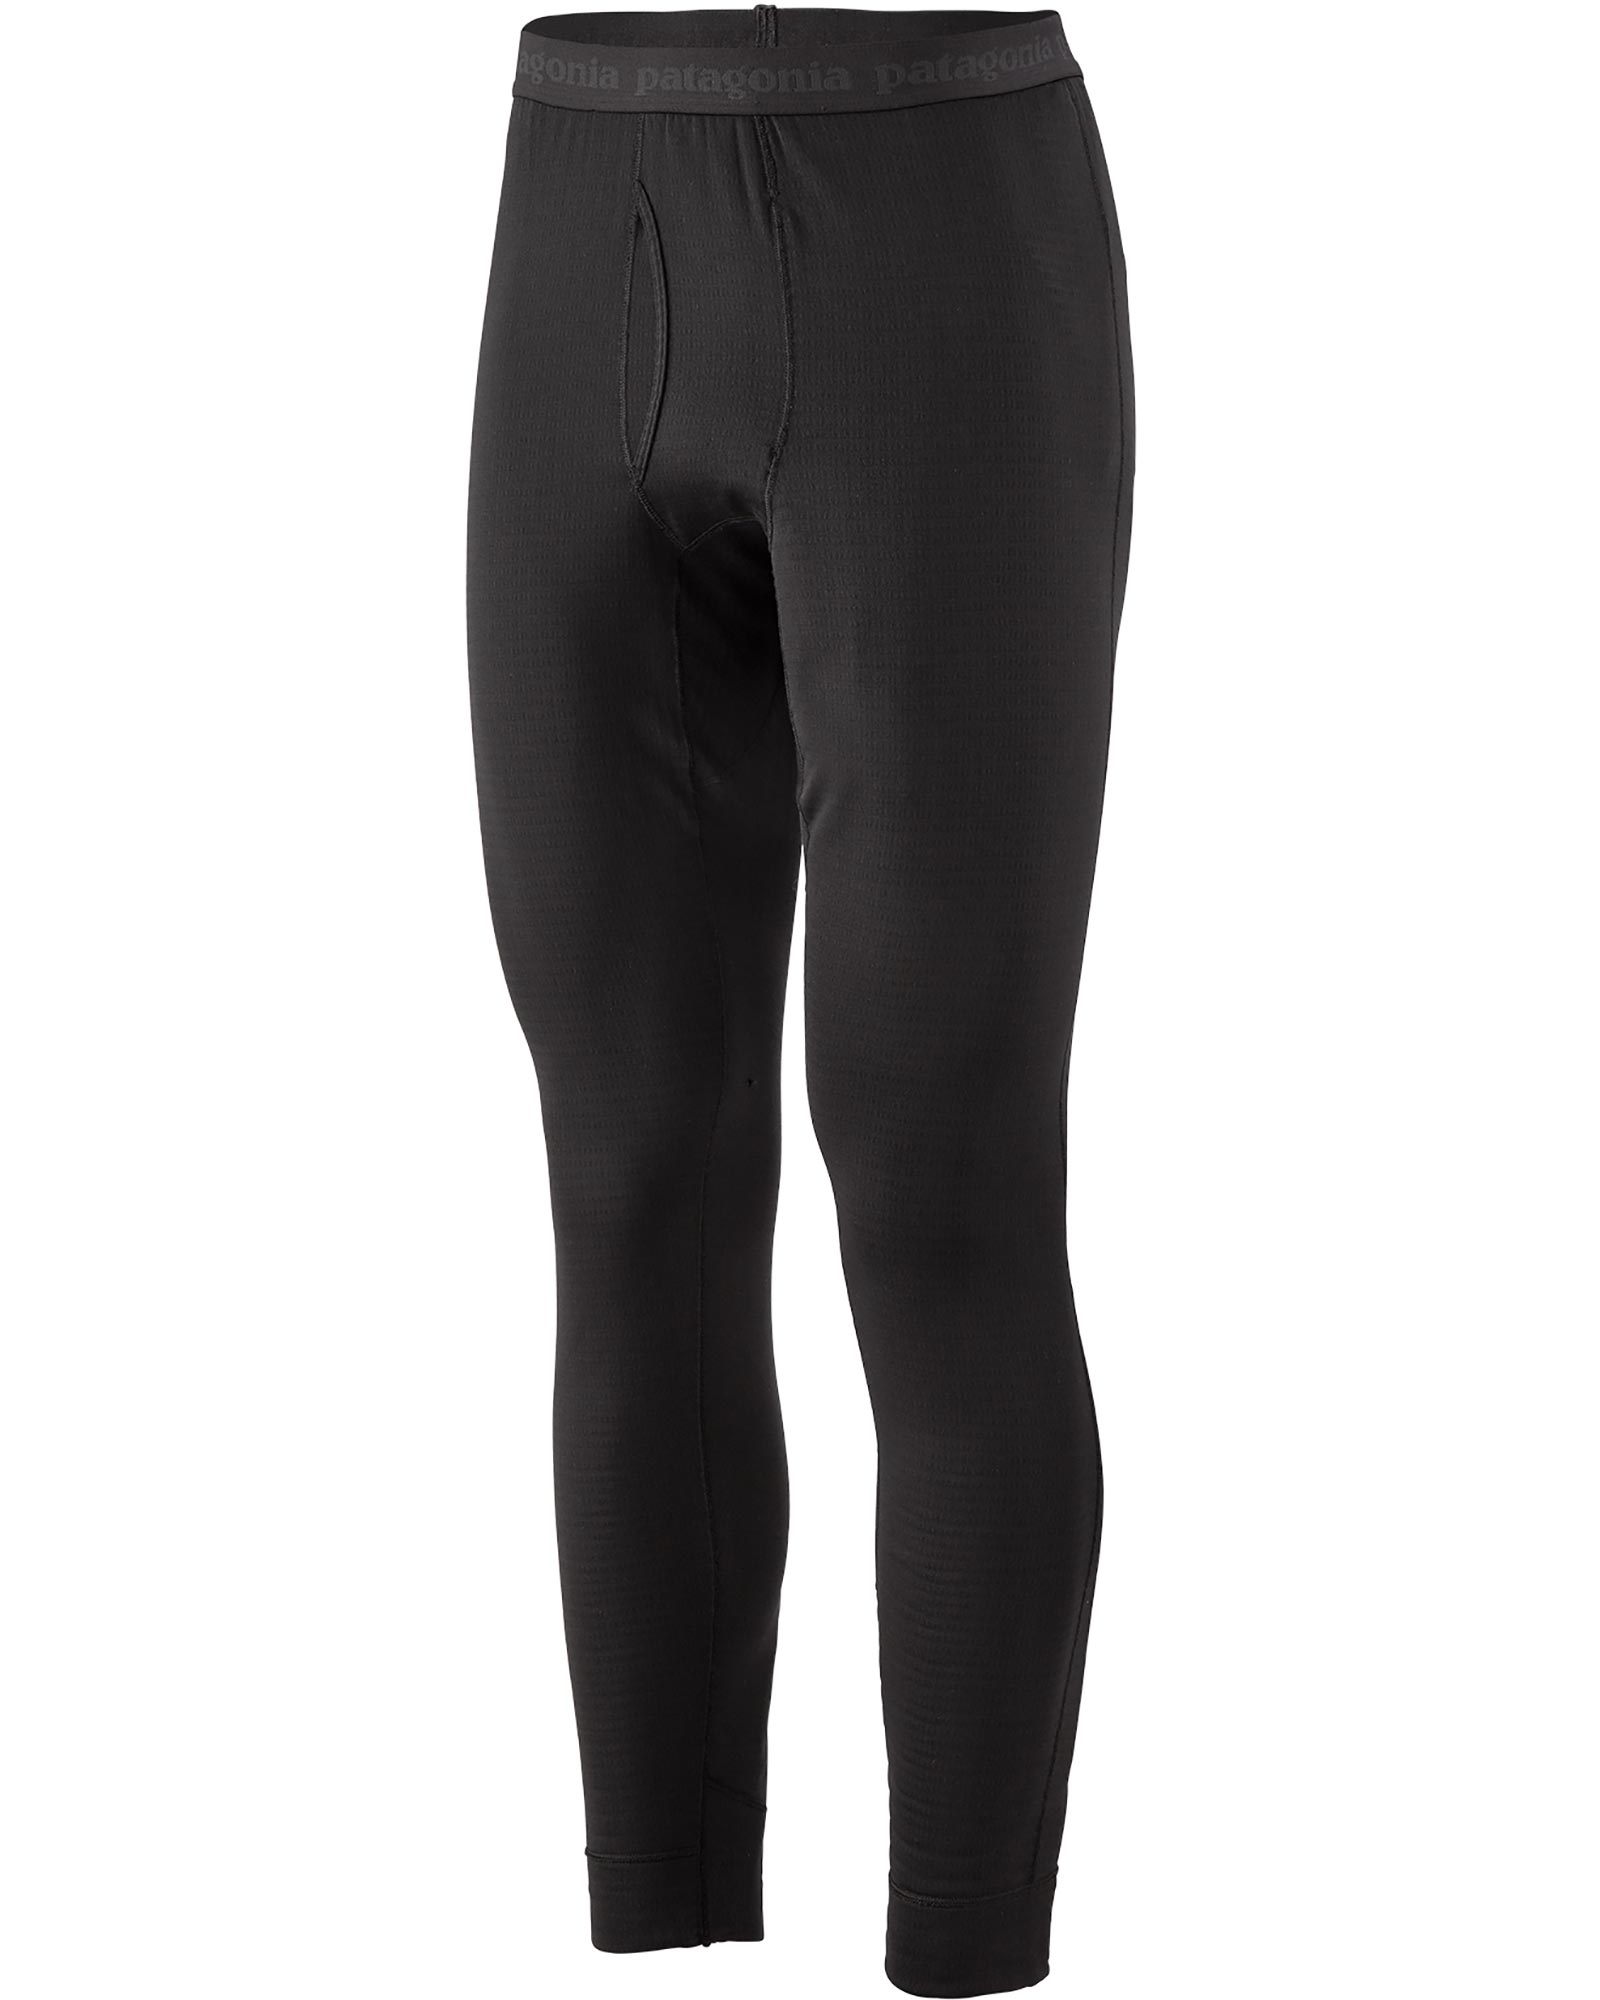 Patagonia Capilene Men's Thermal Weight Tights 0